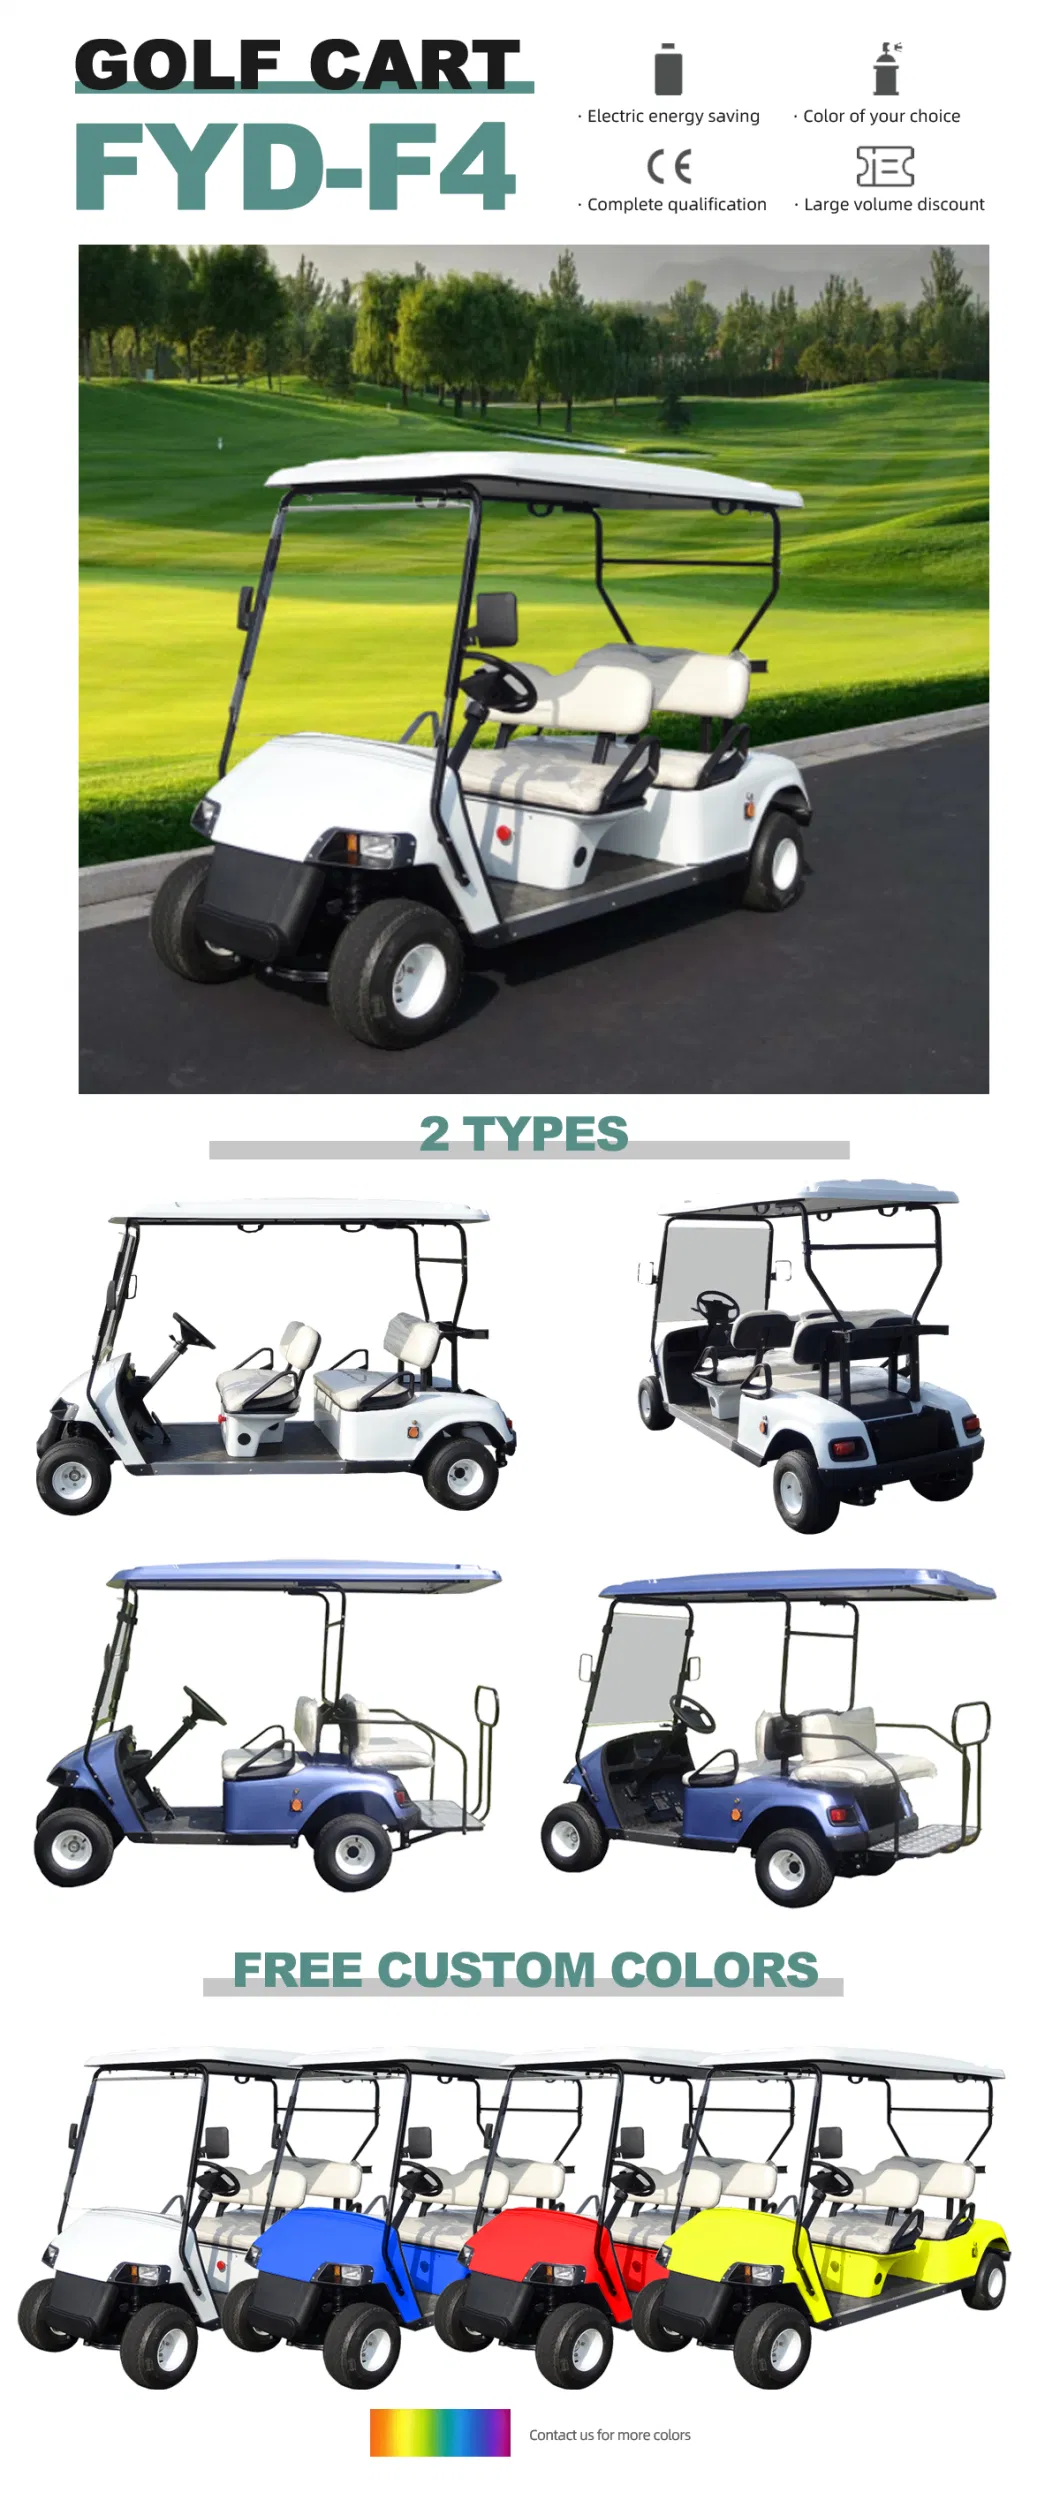 Large Volume Supply Western Style Sport Modified Fast Golf Carts for Sale 4 Seats